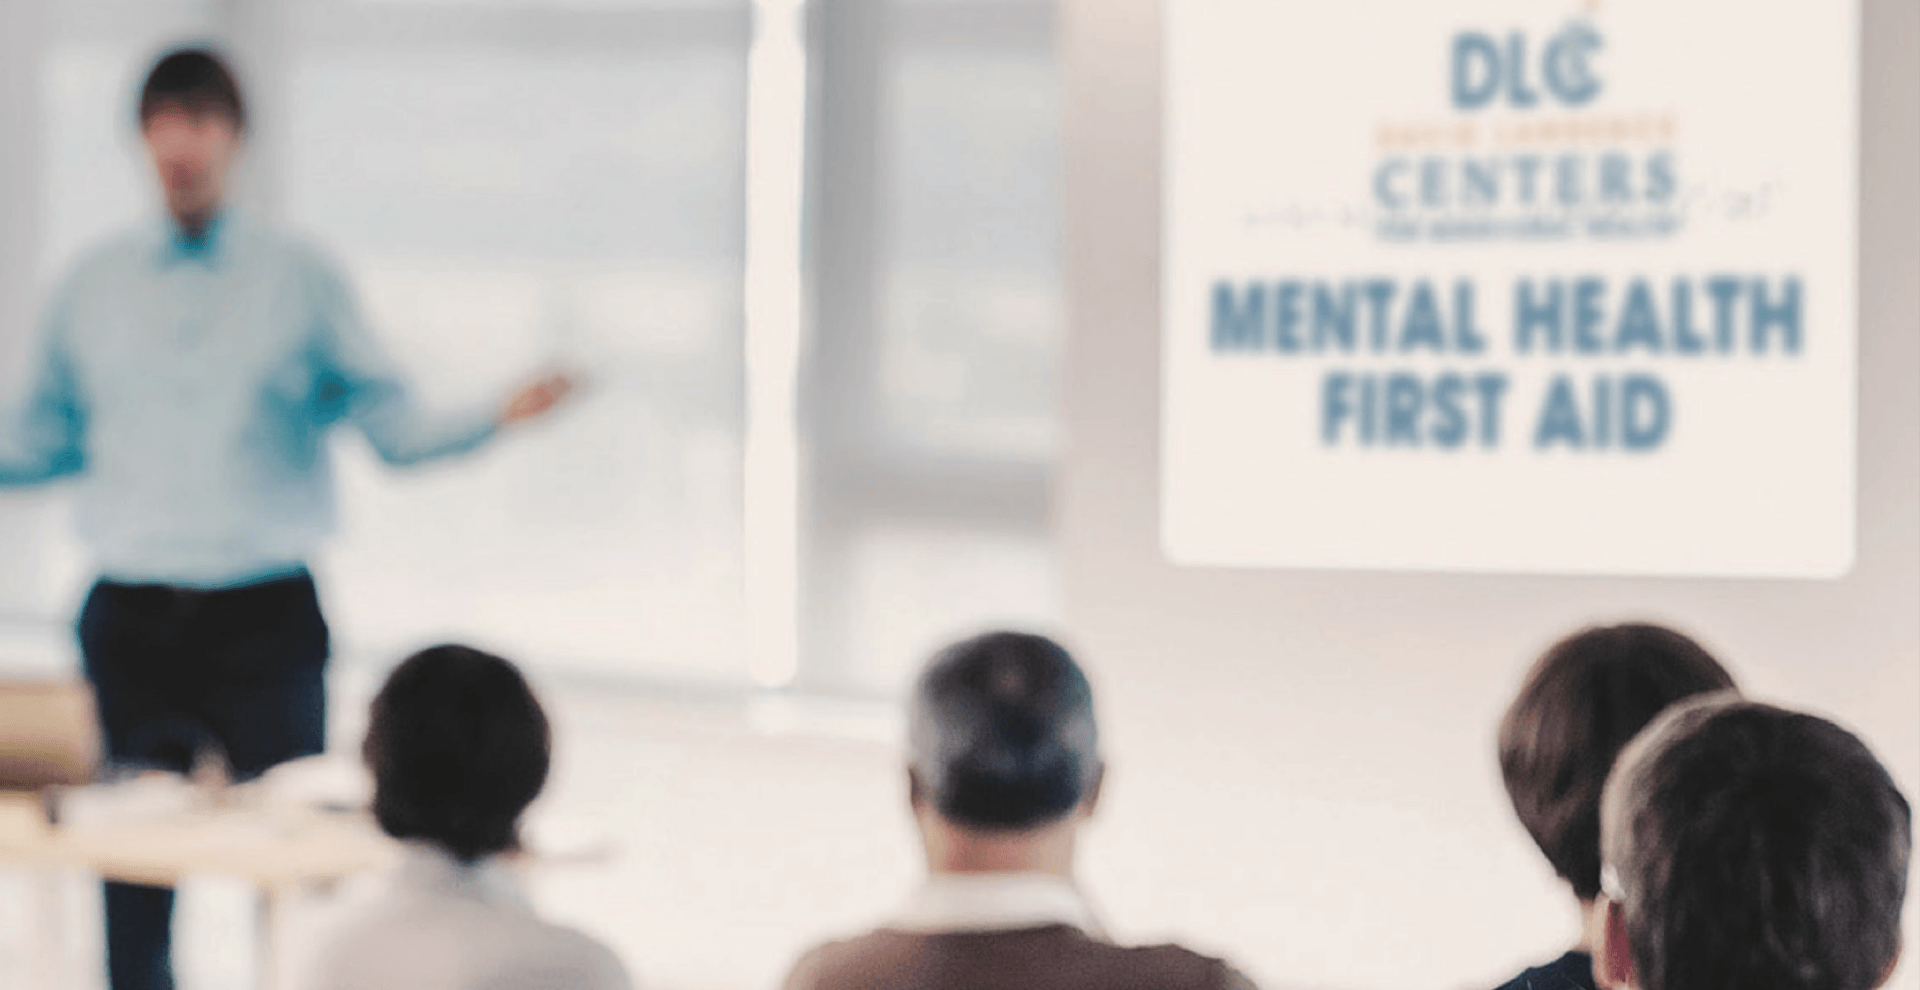 June 19th Adult Mental Health First Aid Training (In-Person Instructor-Led Session)